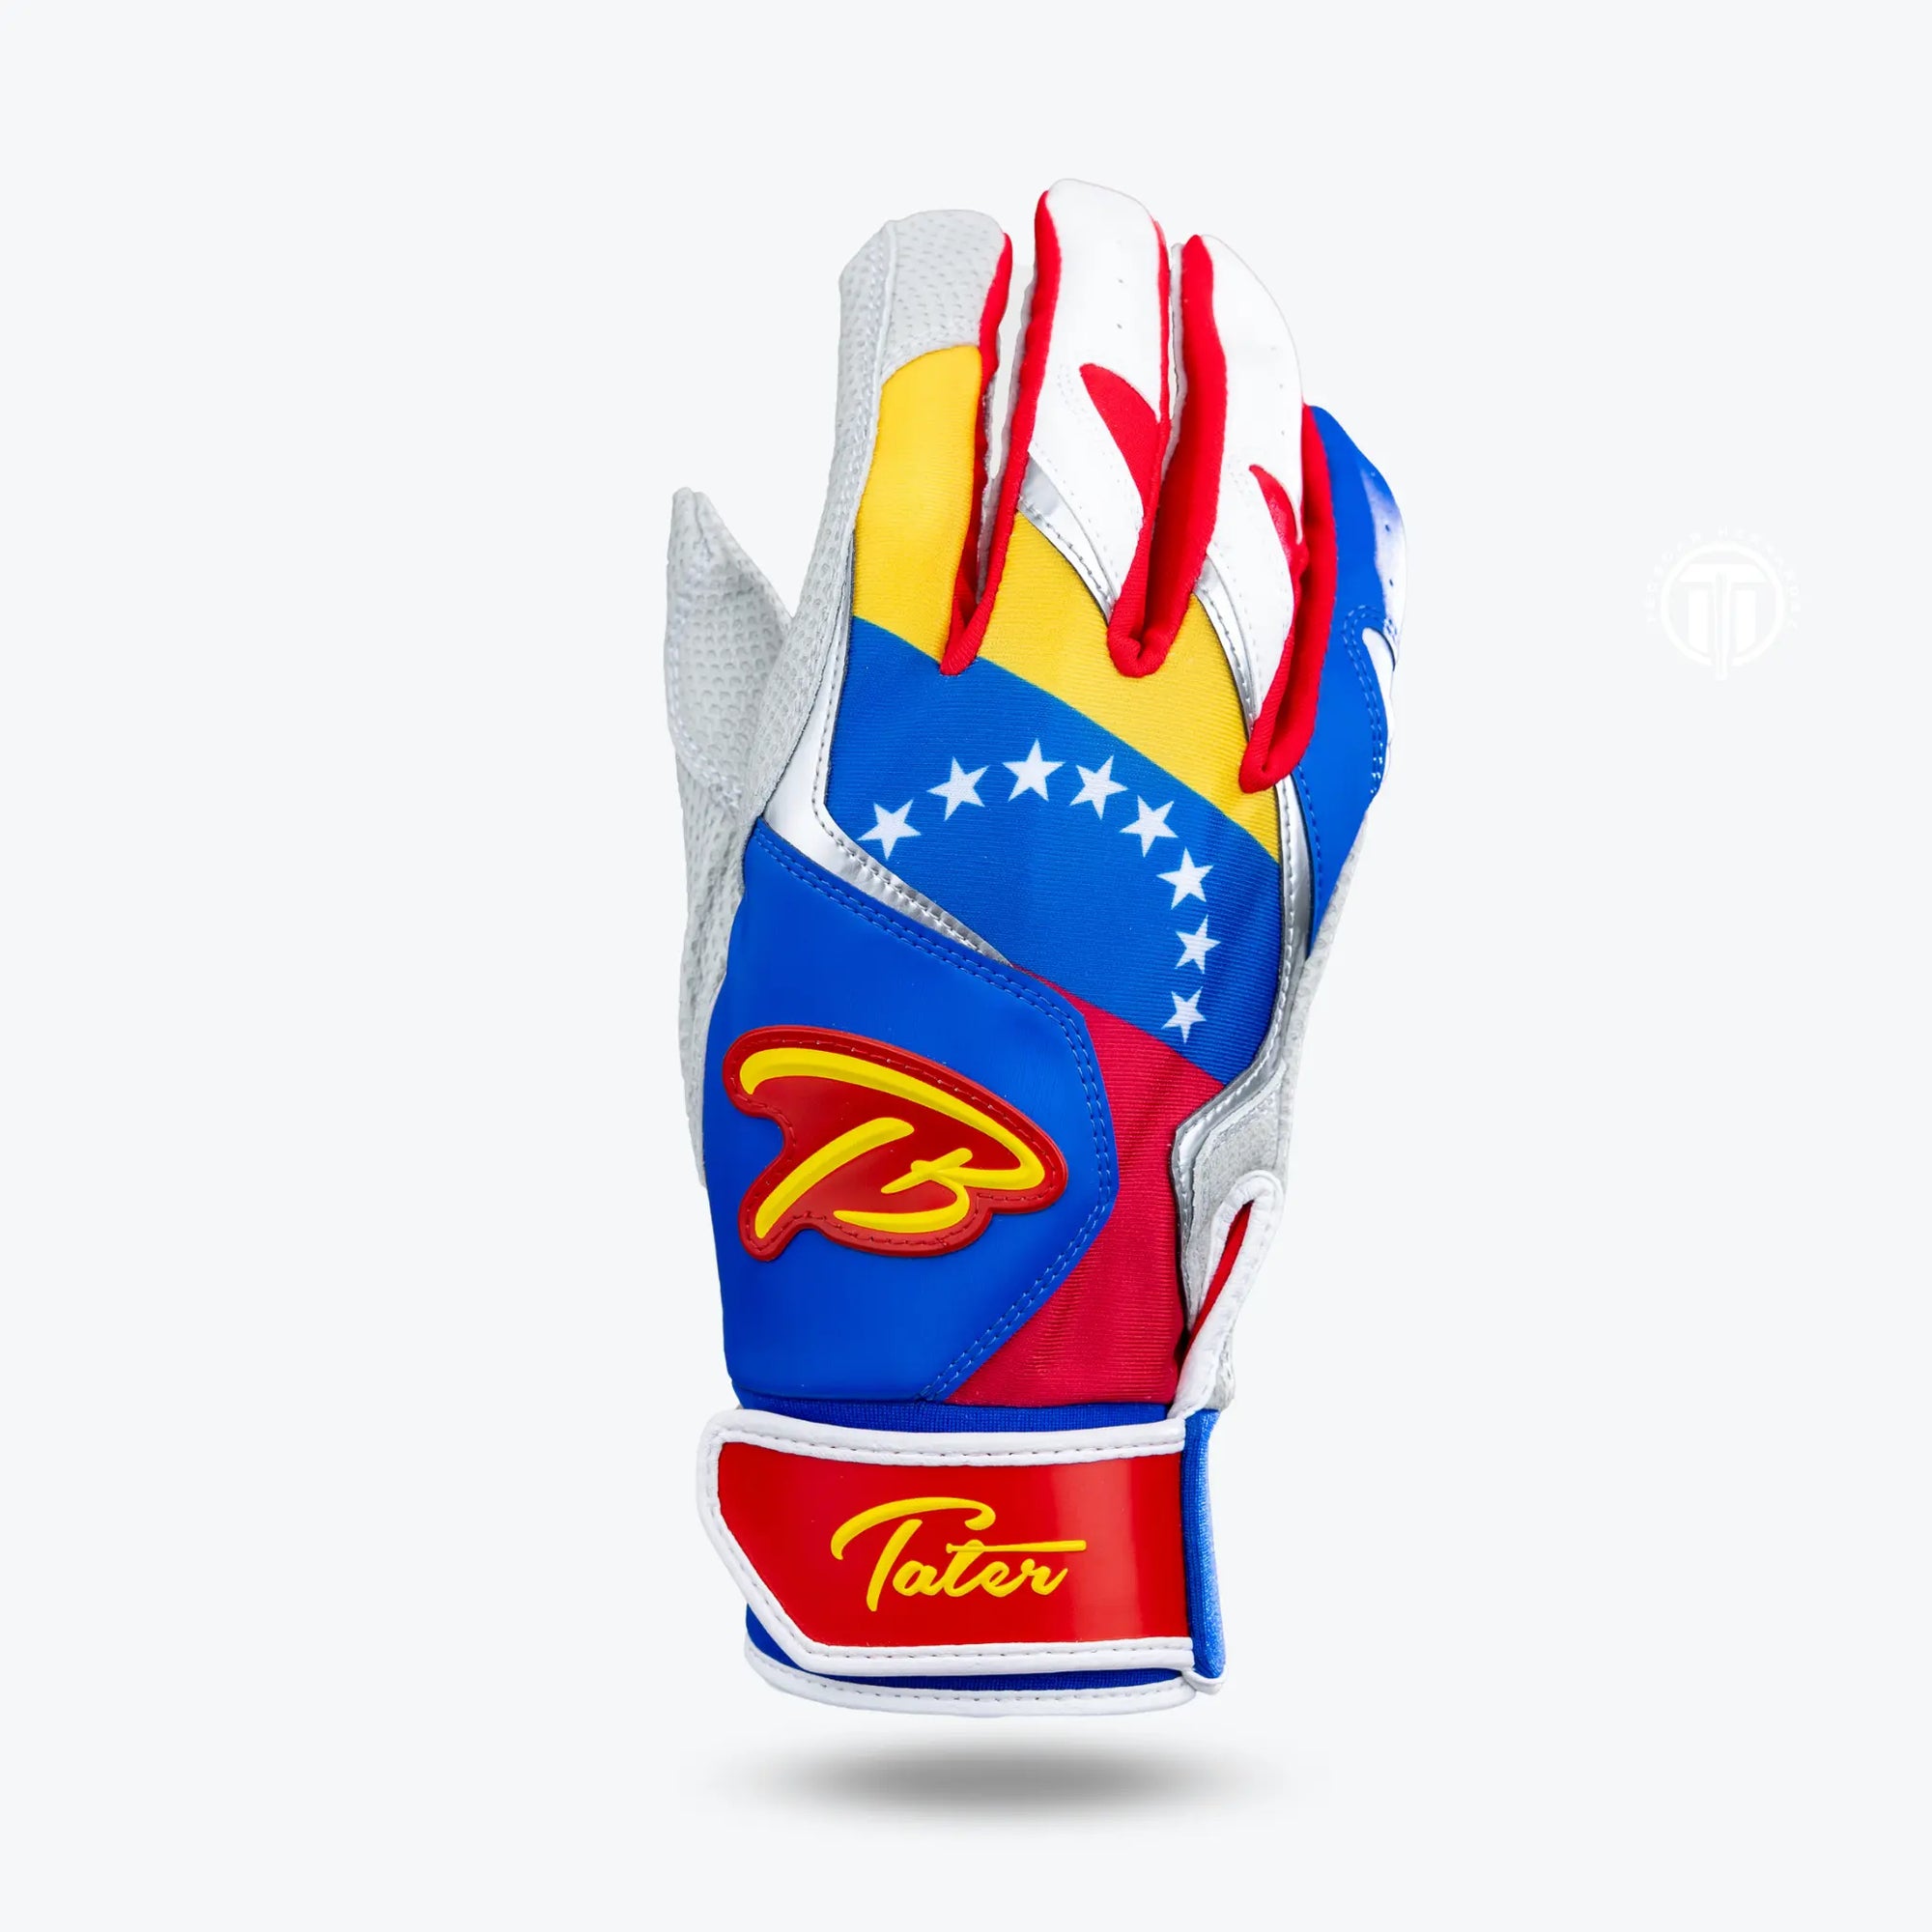 Adult-sized Tater Baseball batting gloves featuring a vibrant Venezuelan flag-inspired design with a blue, yellow, and red colorway, enhanced with a prominent Tater logo on the adjustable wrist strap, and a stylized 'TB' emblem on the back for a patriotic and performance-oriented look.